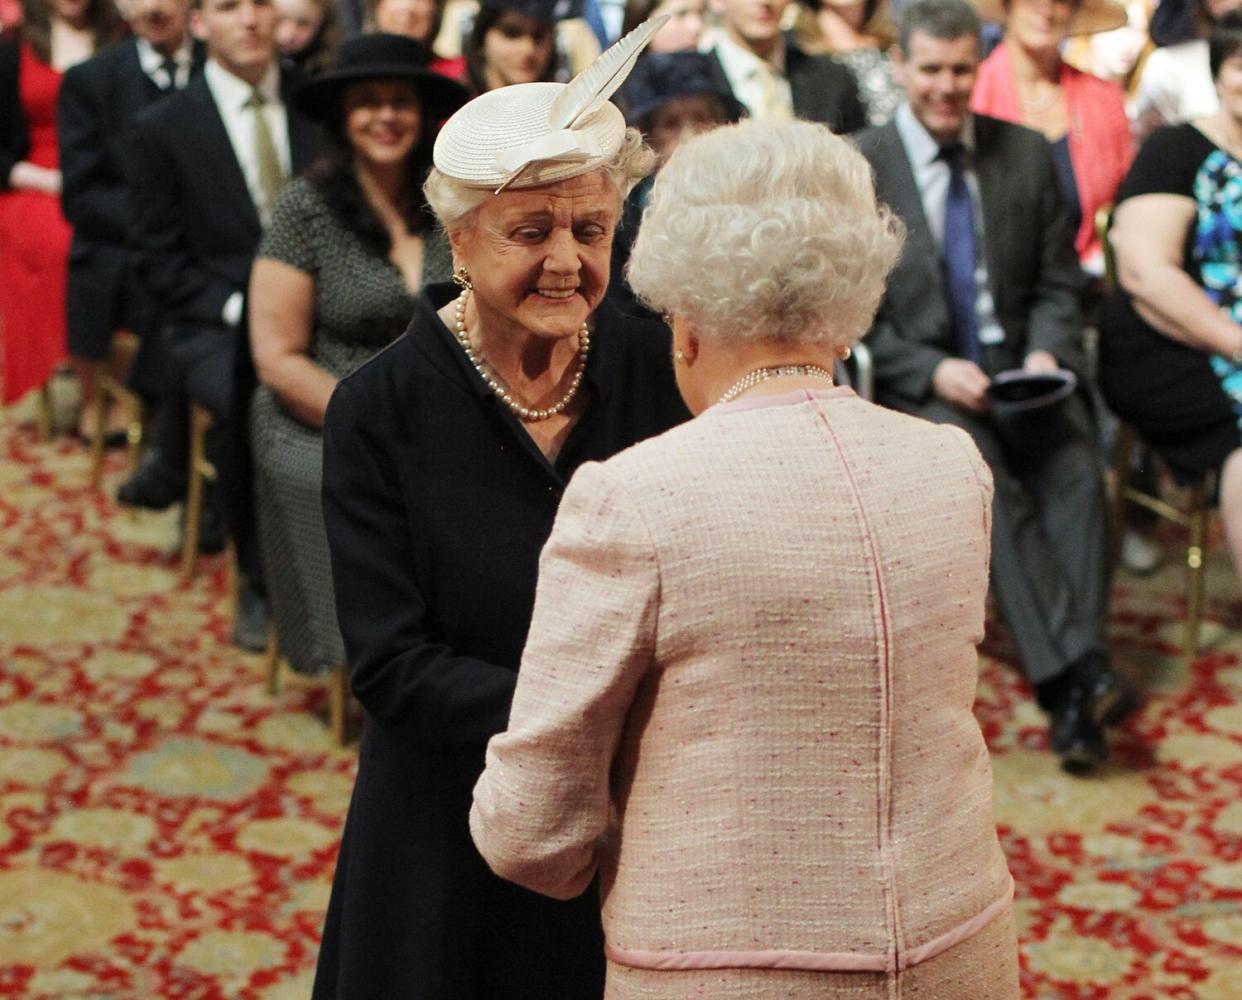 Angela Lansbury is made a Dame Commander by Queen Elizabeth II during an Investiture ceremony at Windsor Castle, Berkshire